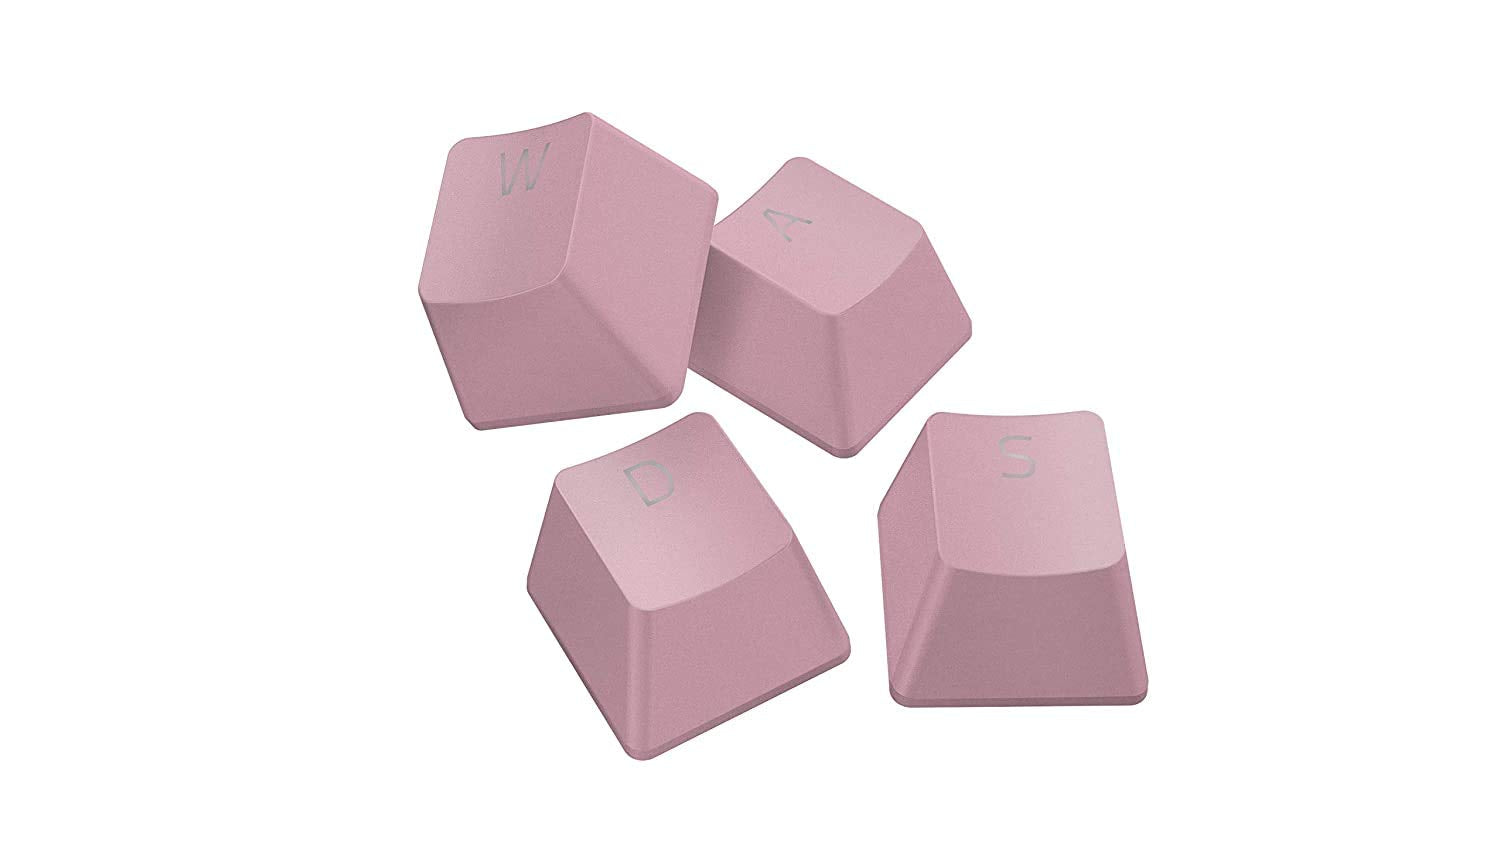 Razer Doubleshot PBT Keycap Upgrade Set for Mechanical & Optical Keyboards: Compatible with Standard 104/105 US and UK layouts Quartz Pink RC21-01490300-R3M1-KEYBOARD-RAZER-computerspace